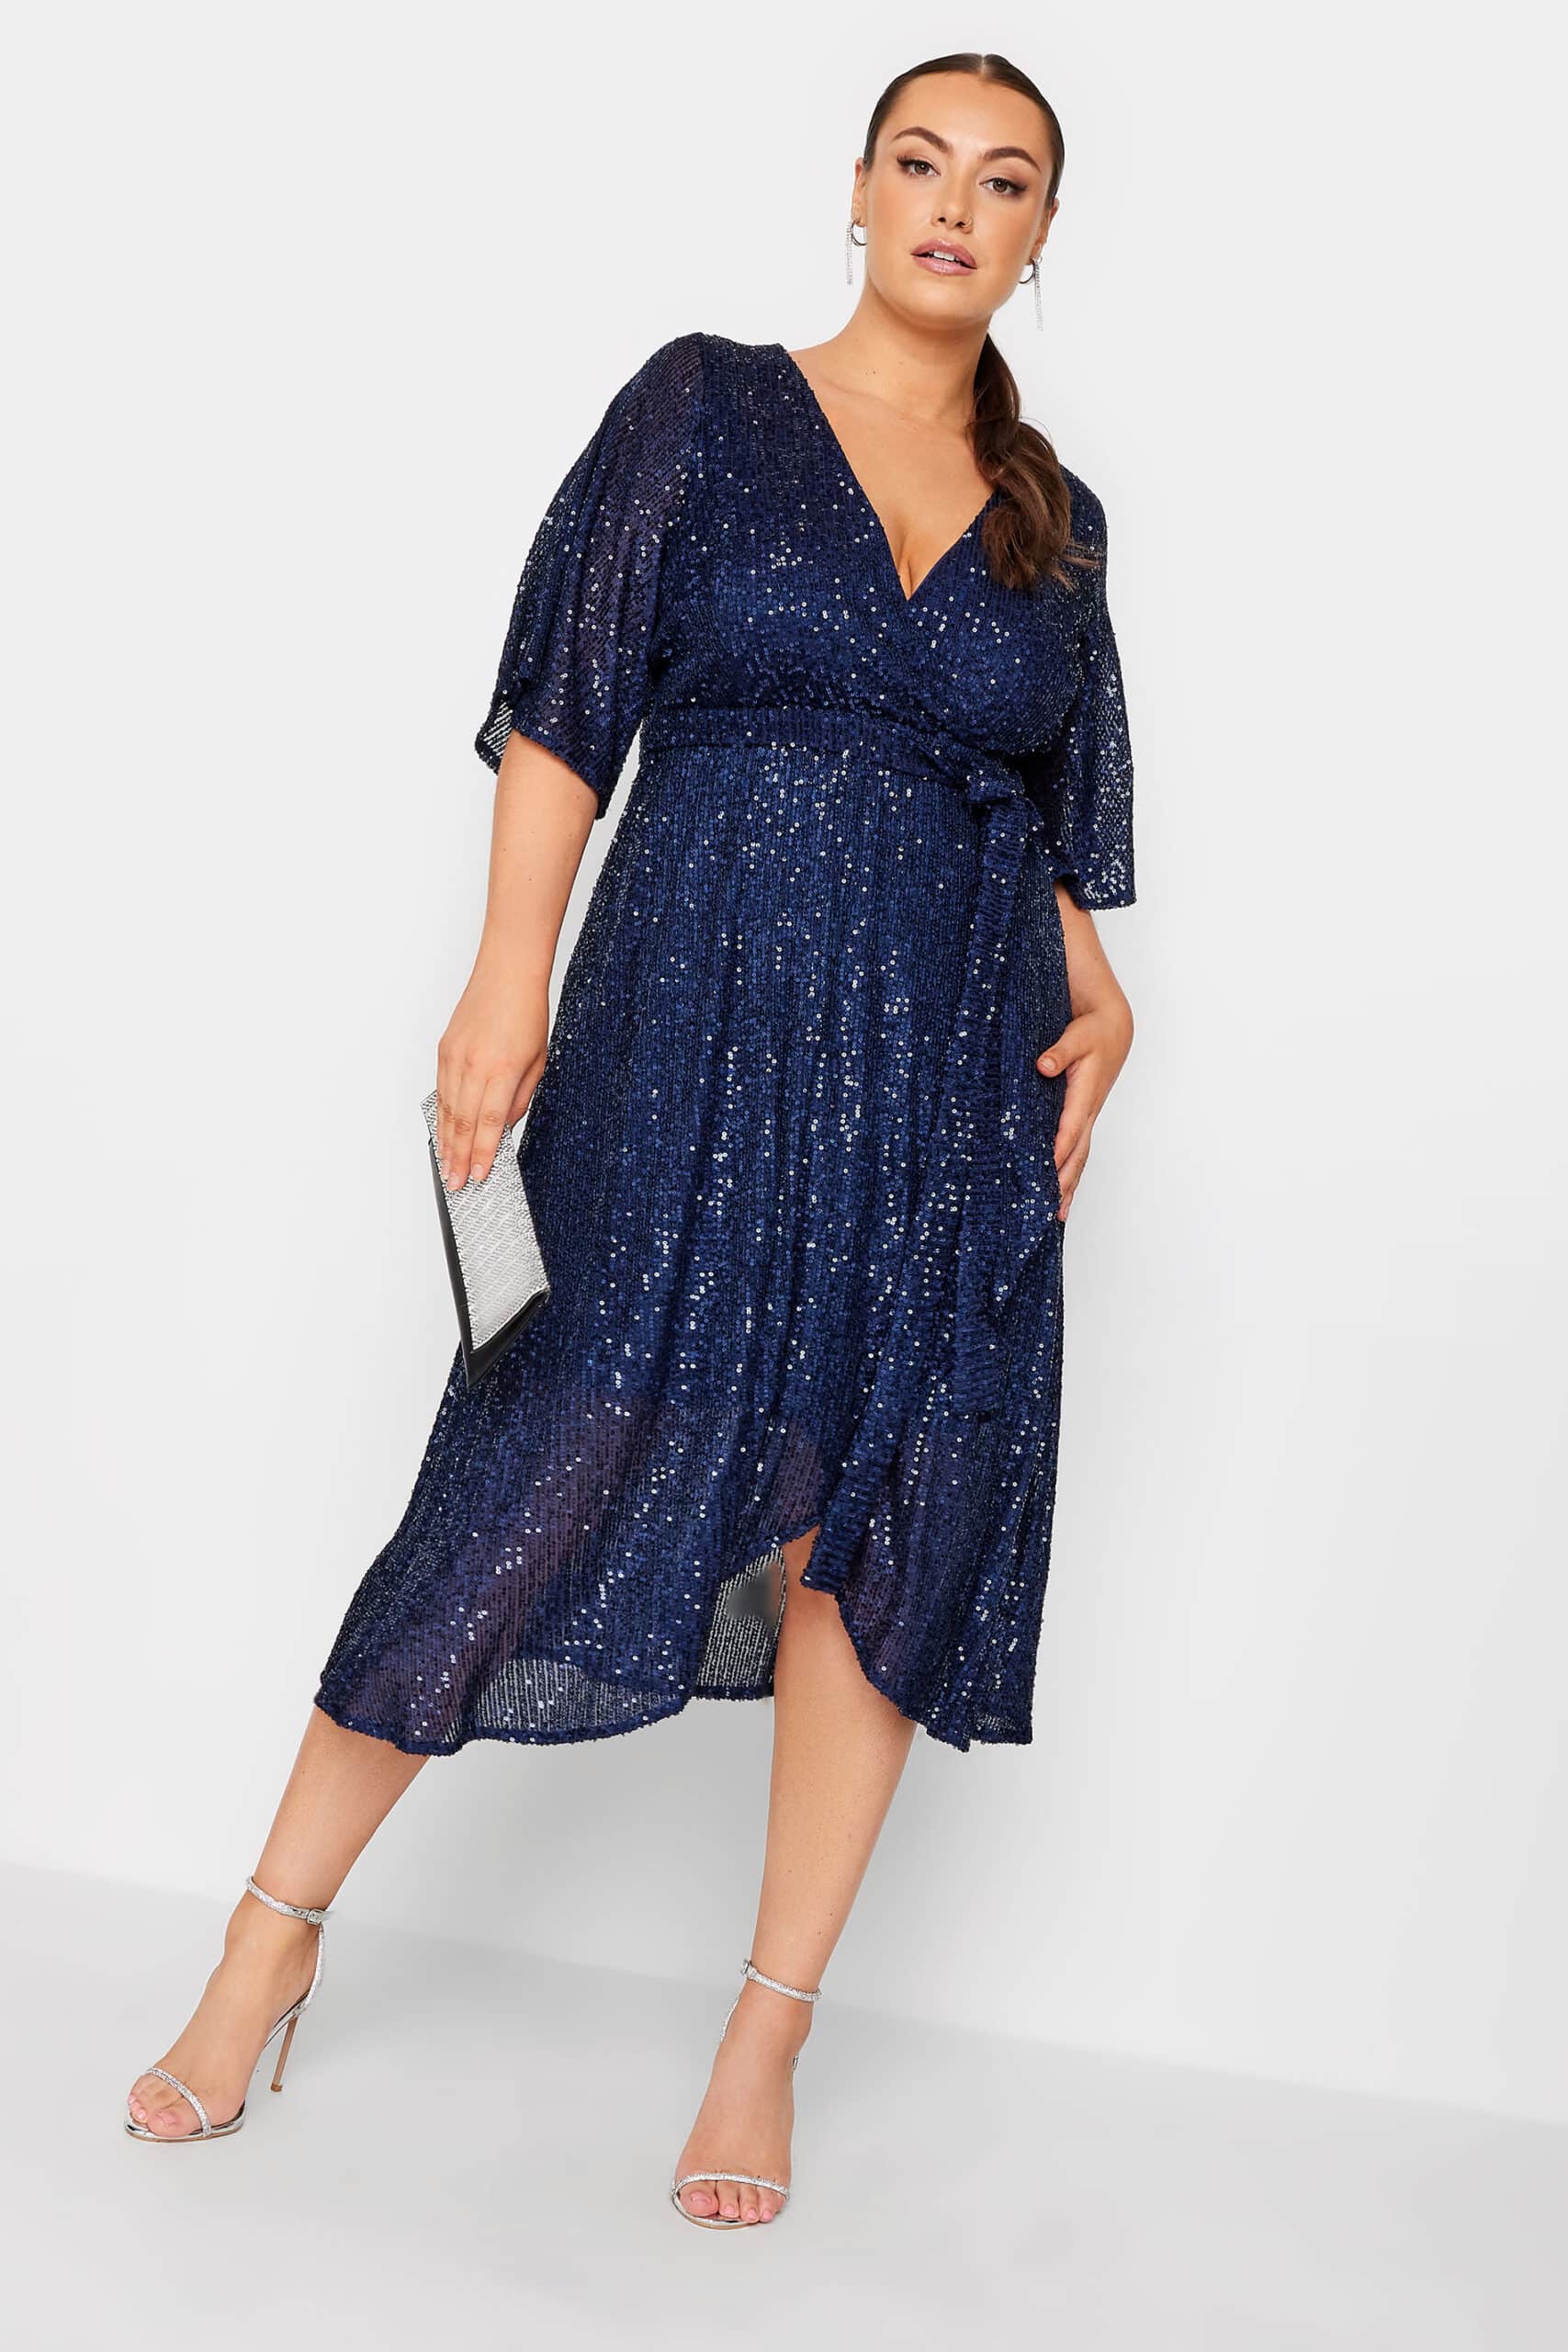 YOURS LONDON Curve Navy Blue Sequin Embellished Double Wrap Dress Discounts and Cashback